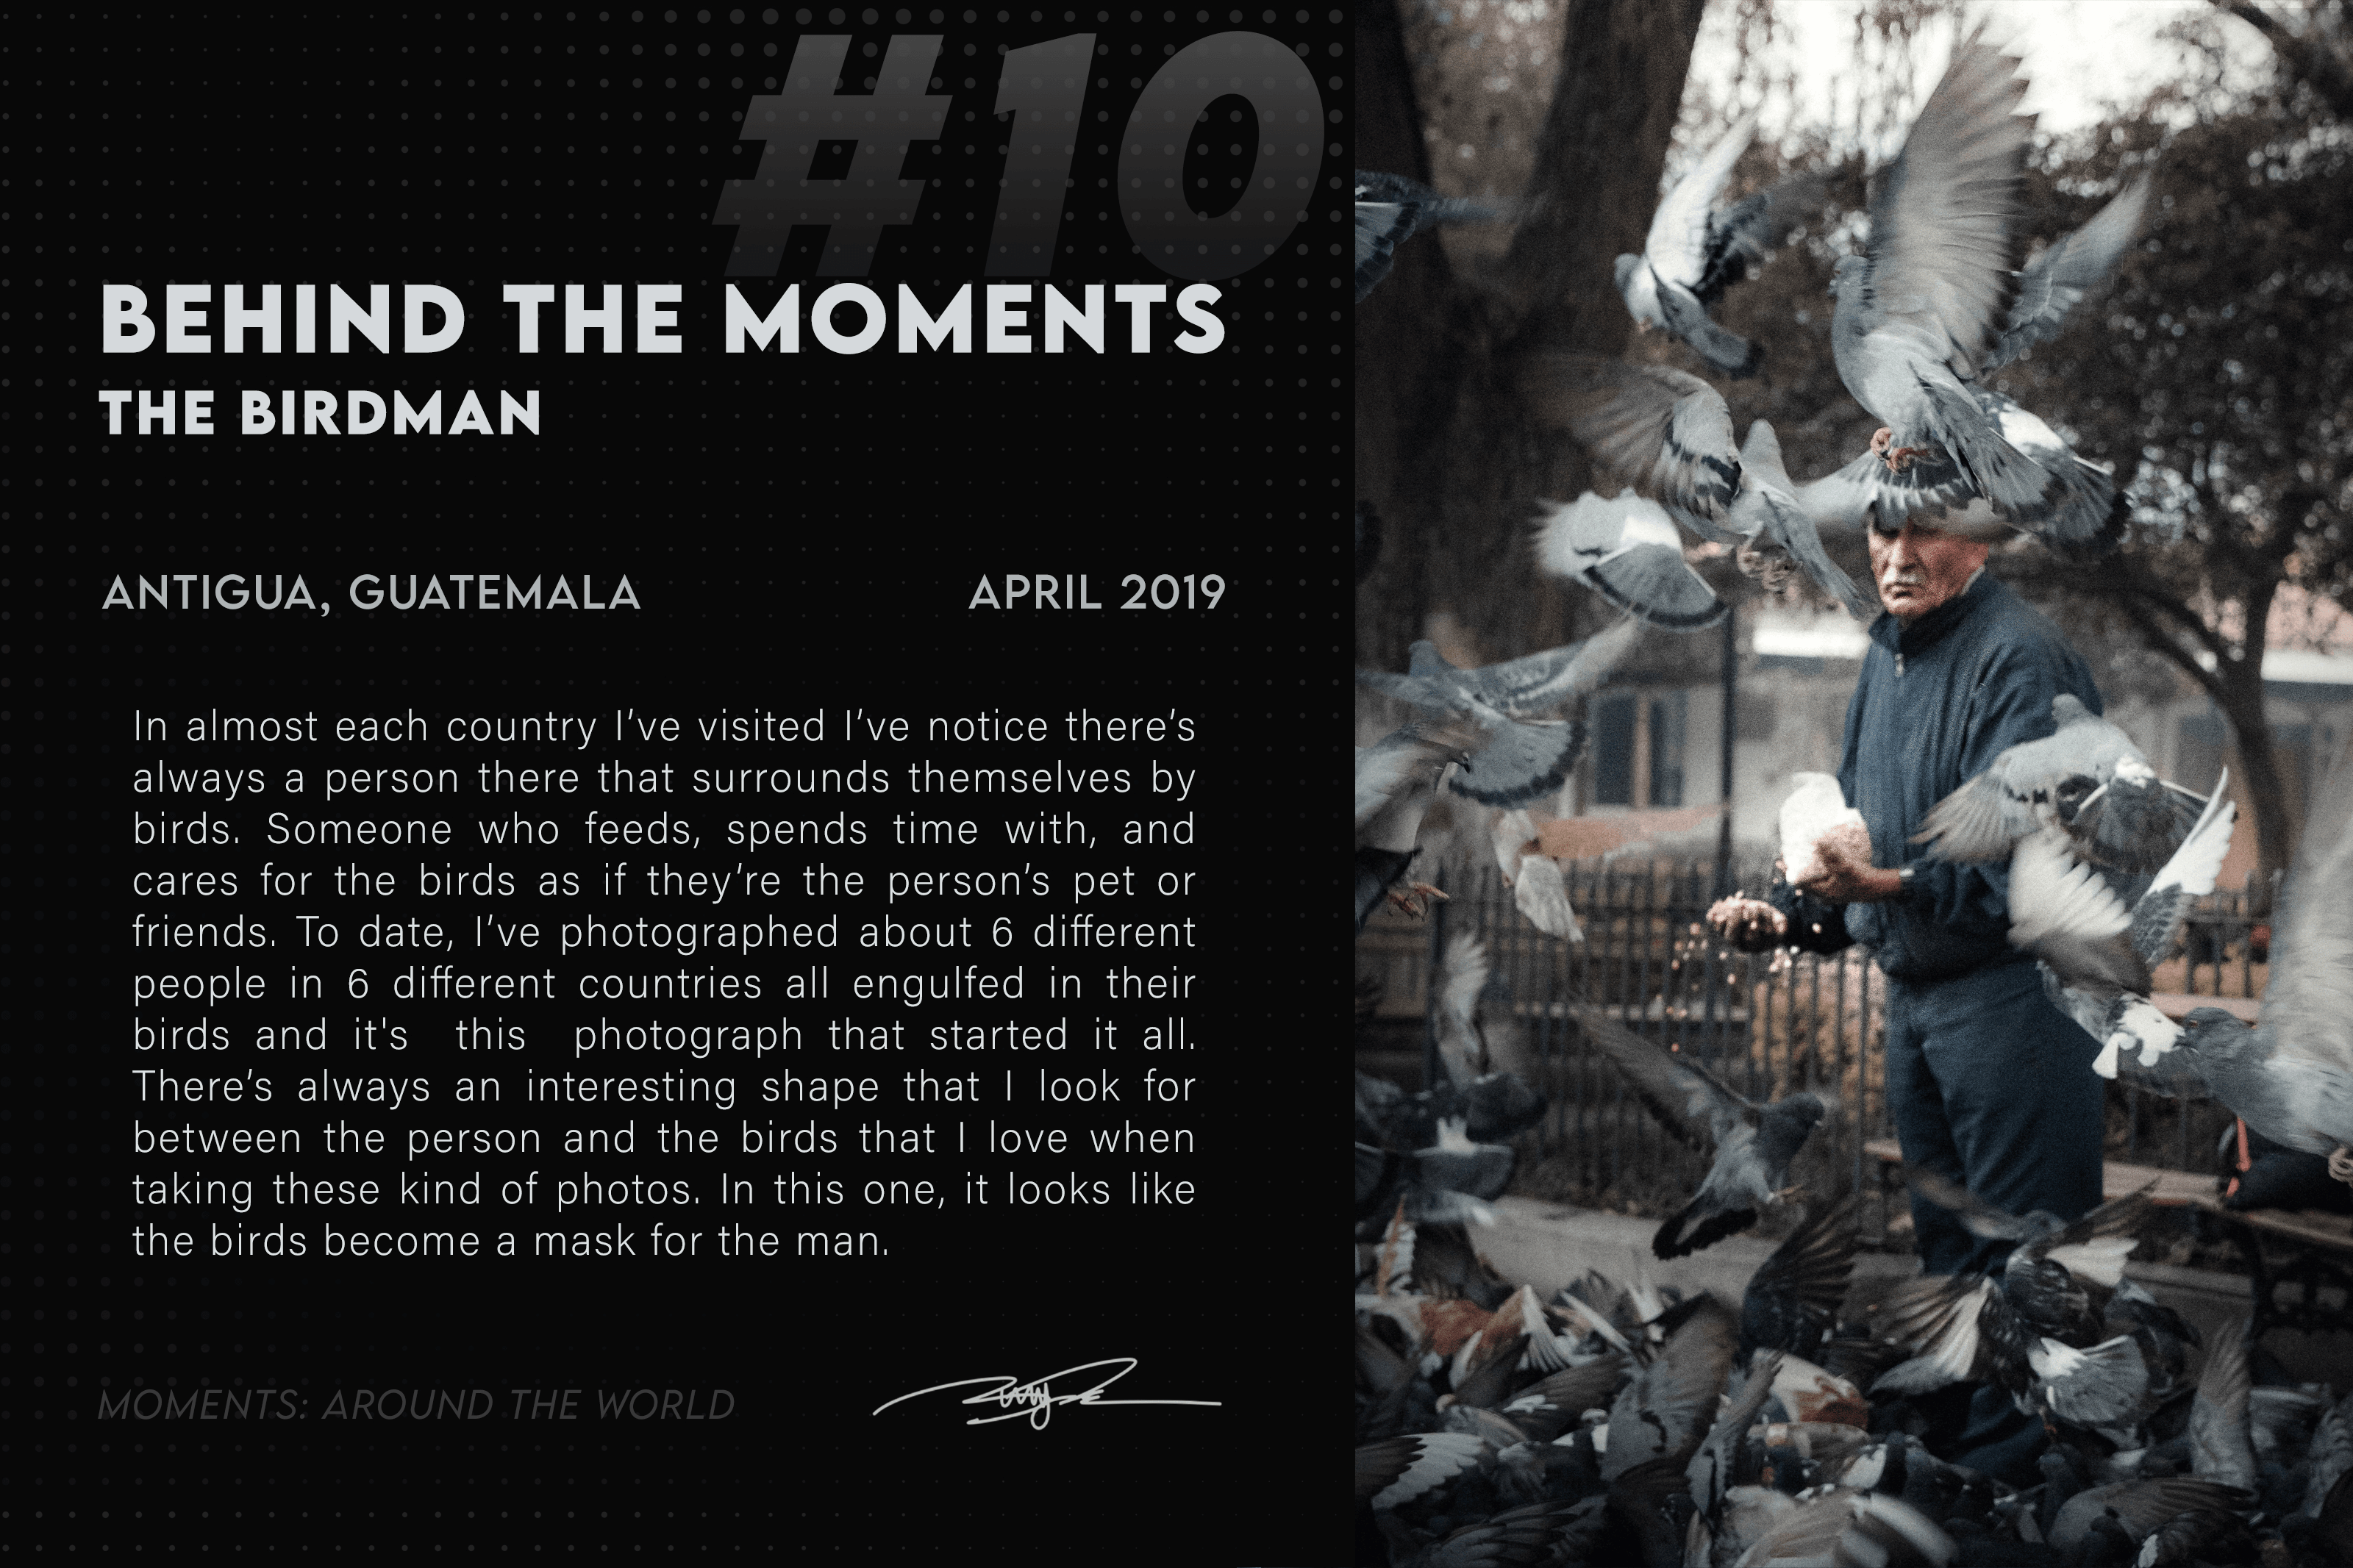 The Birdman - Behind the Moments #10